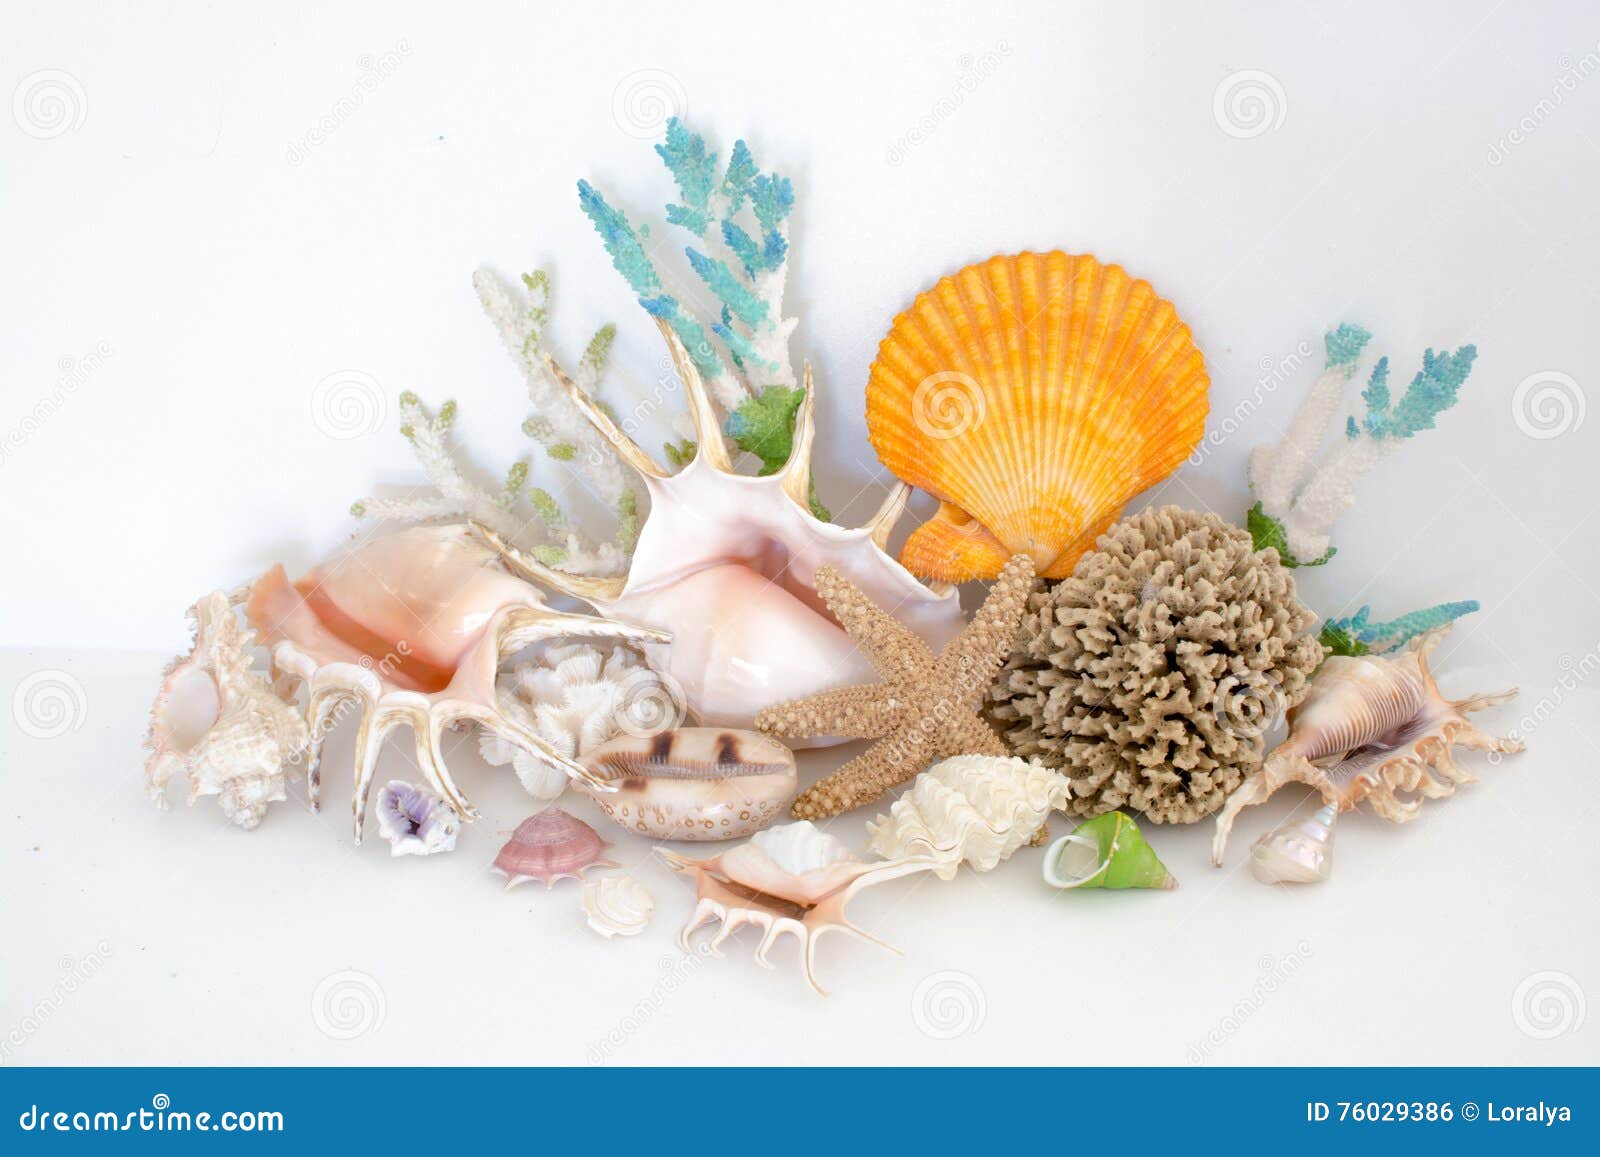 Colorful Arrangement of Sea Shells and Coral Stock Photo - Image 